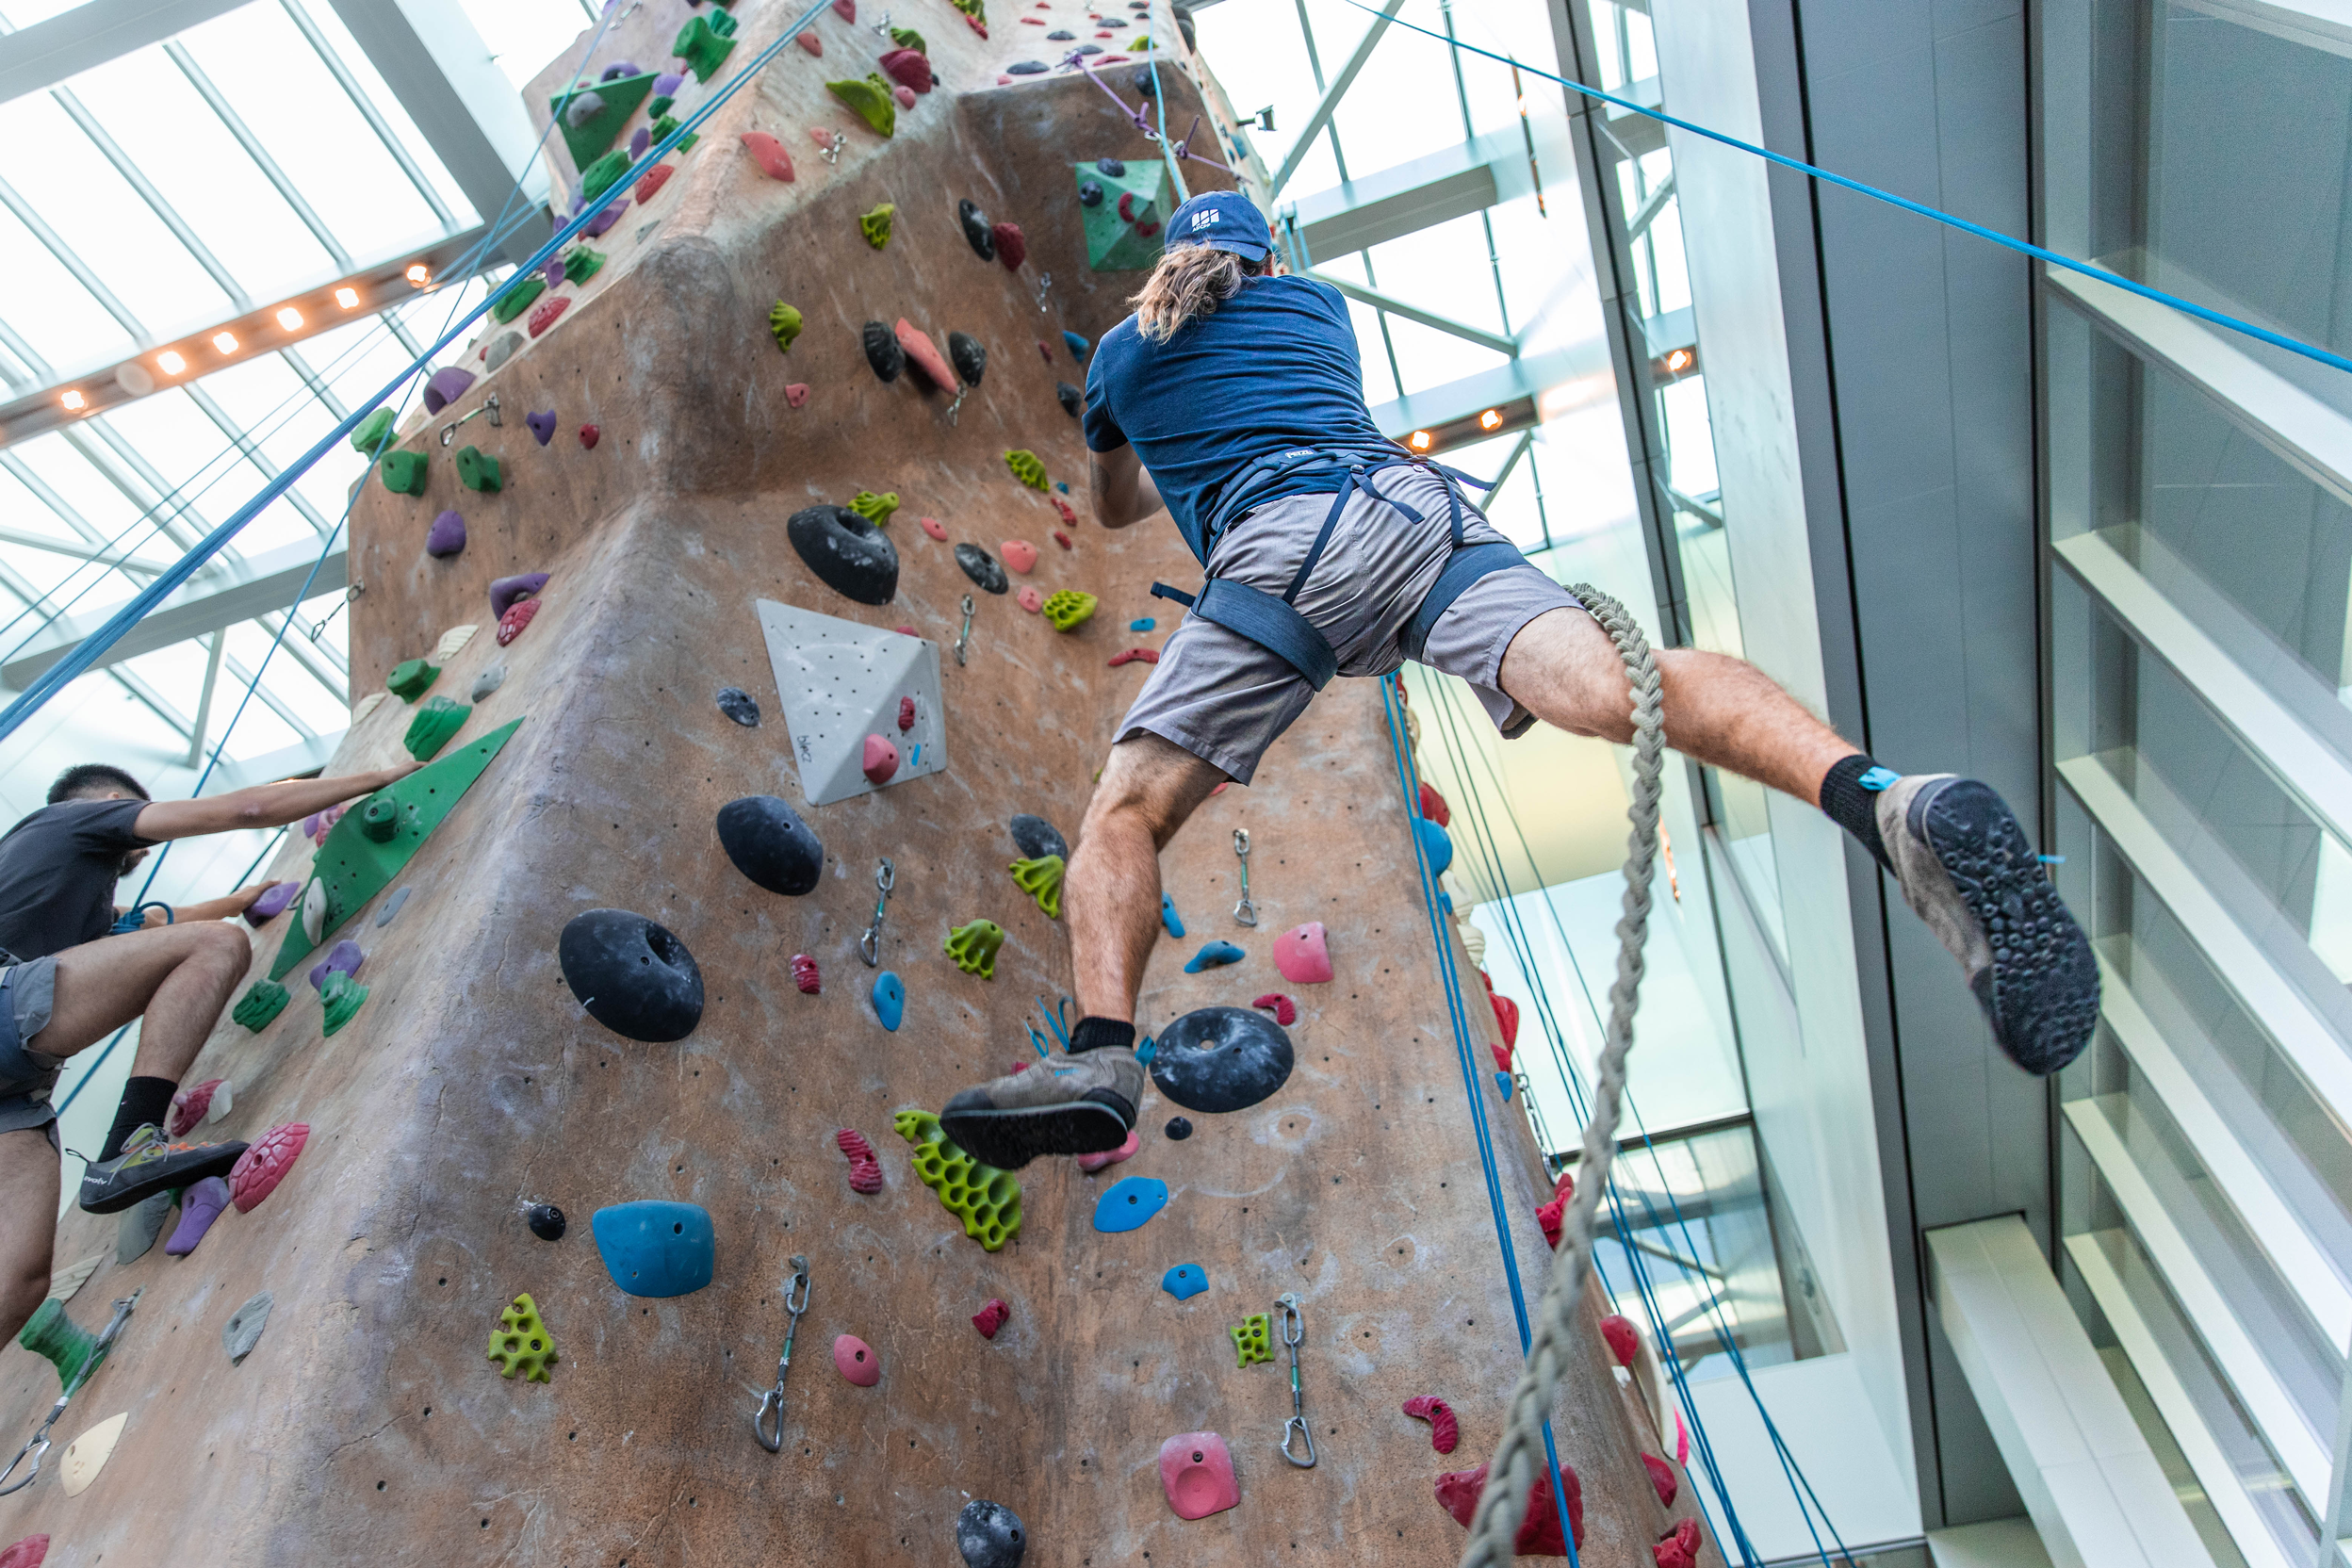 Climber being lowered from the rock climbing wall